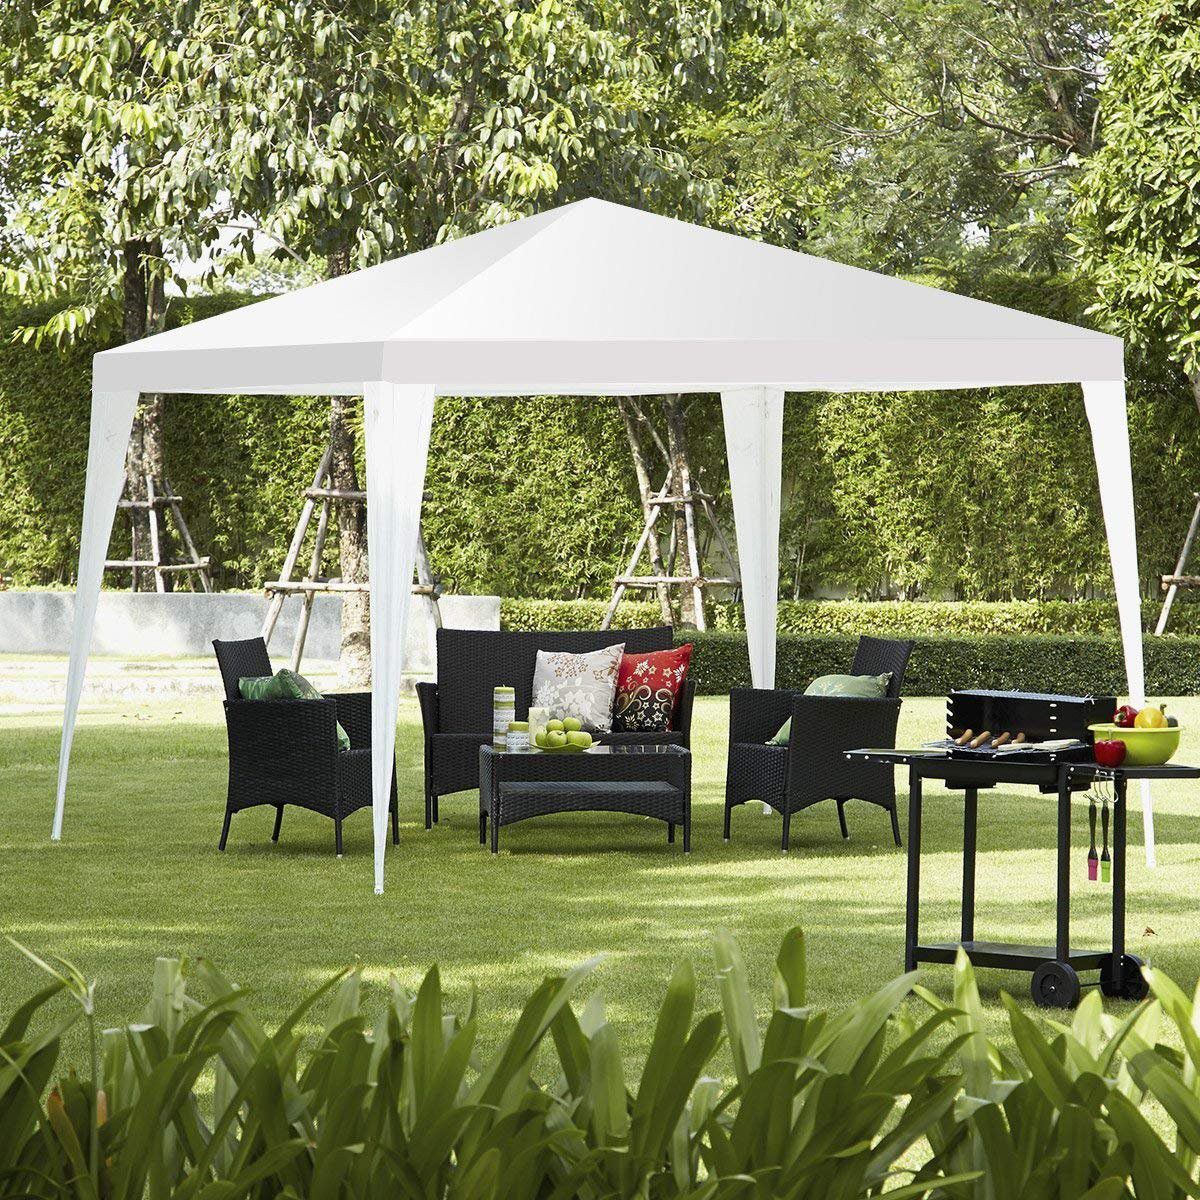 10'x10' Gazebo Pavilion Cater Canopy Wedding Party Tent Outdoor Use